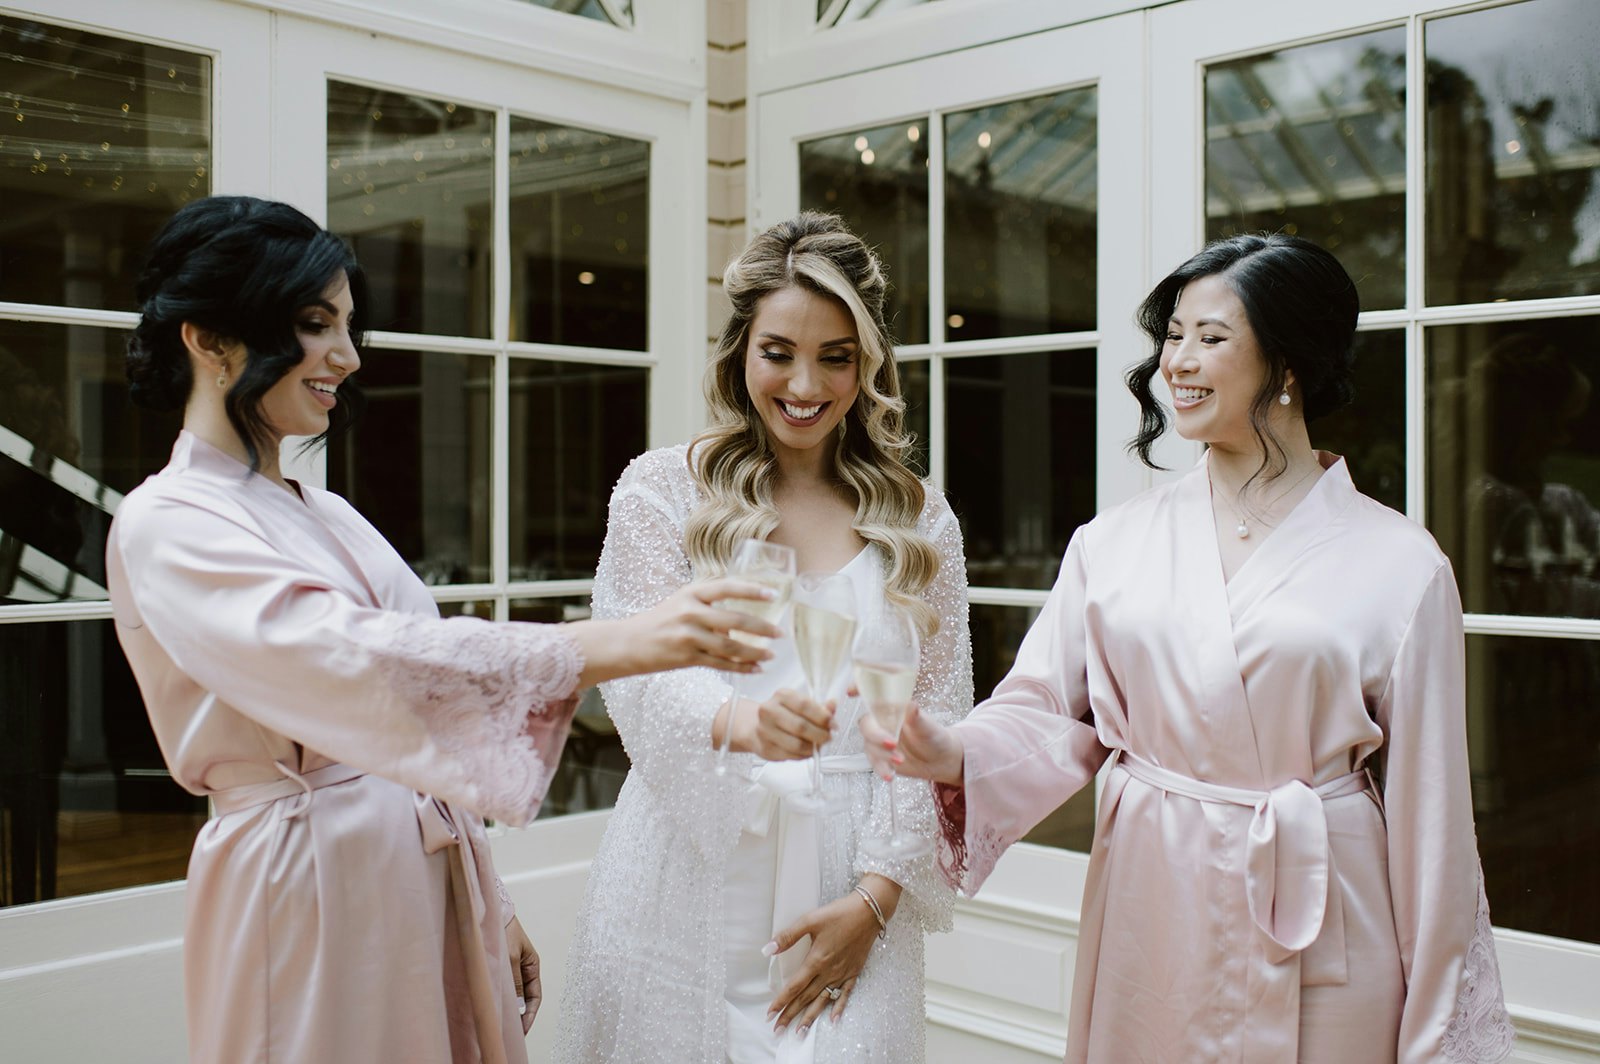 Bride and bridesmaids with champagne